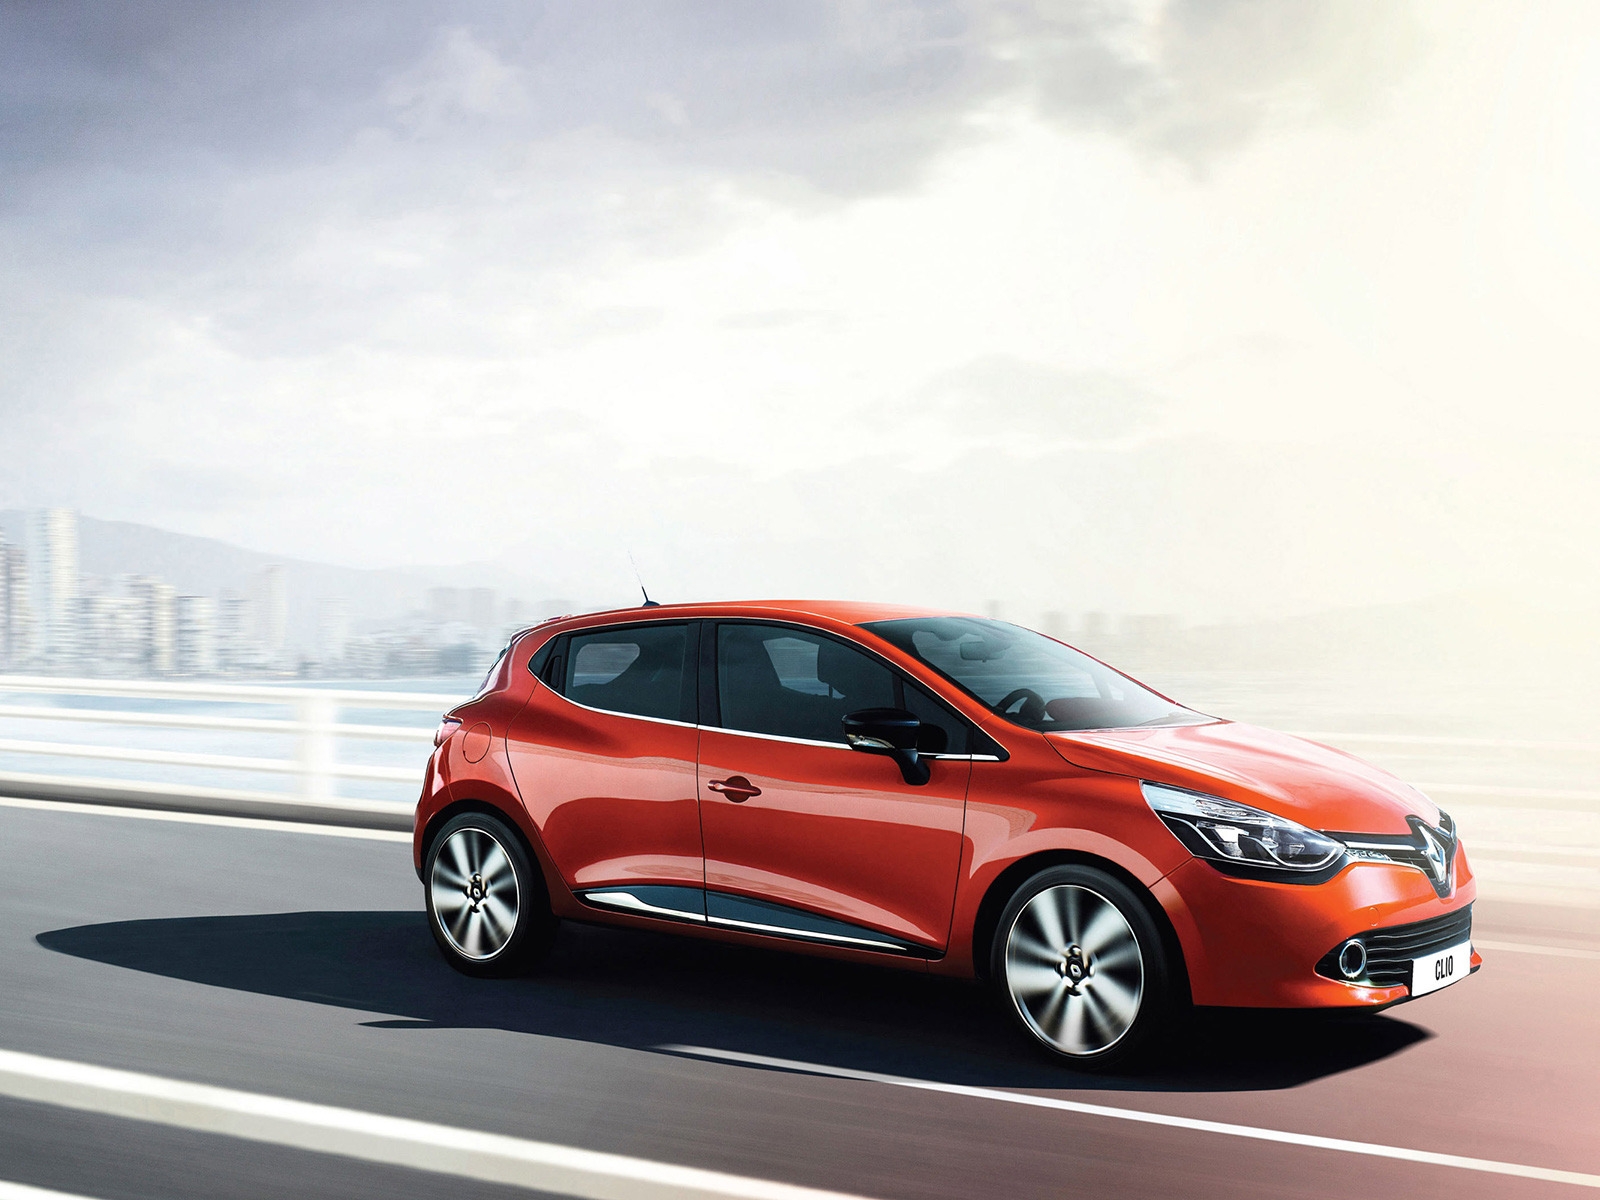 2013 Renault Clio for 1600 x 1200 resolution